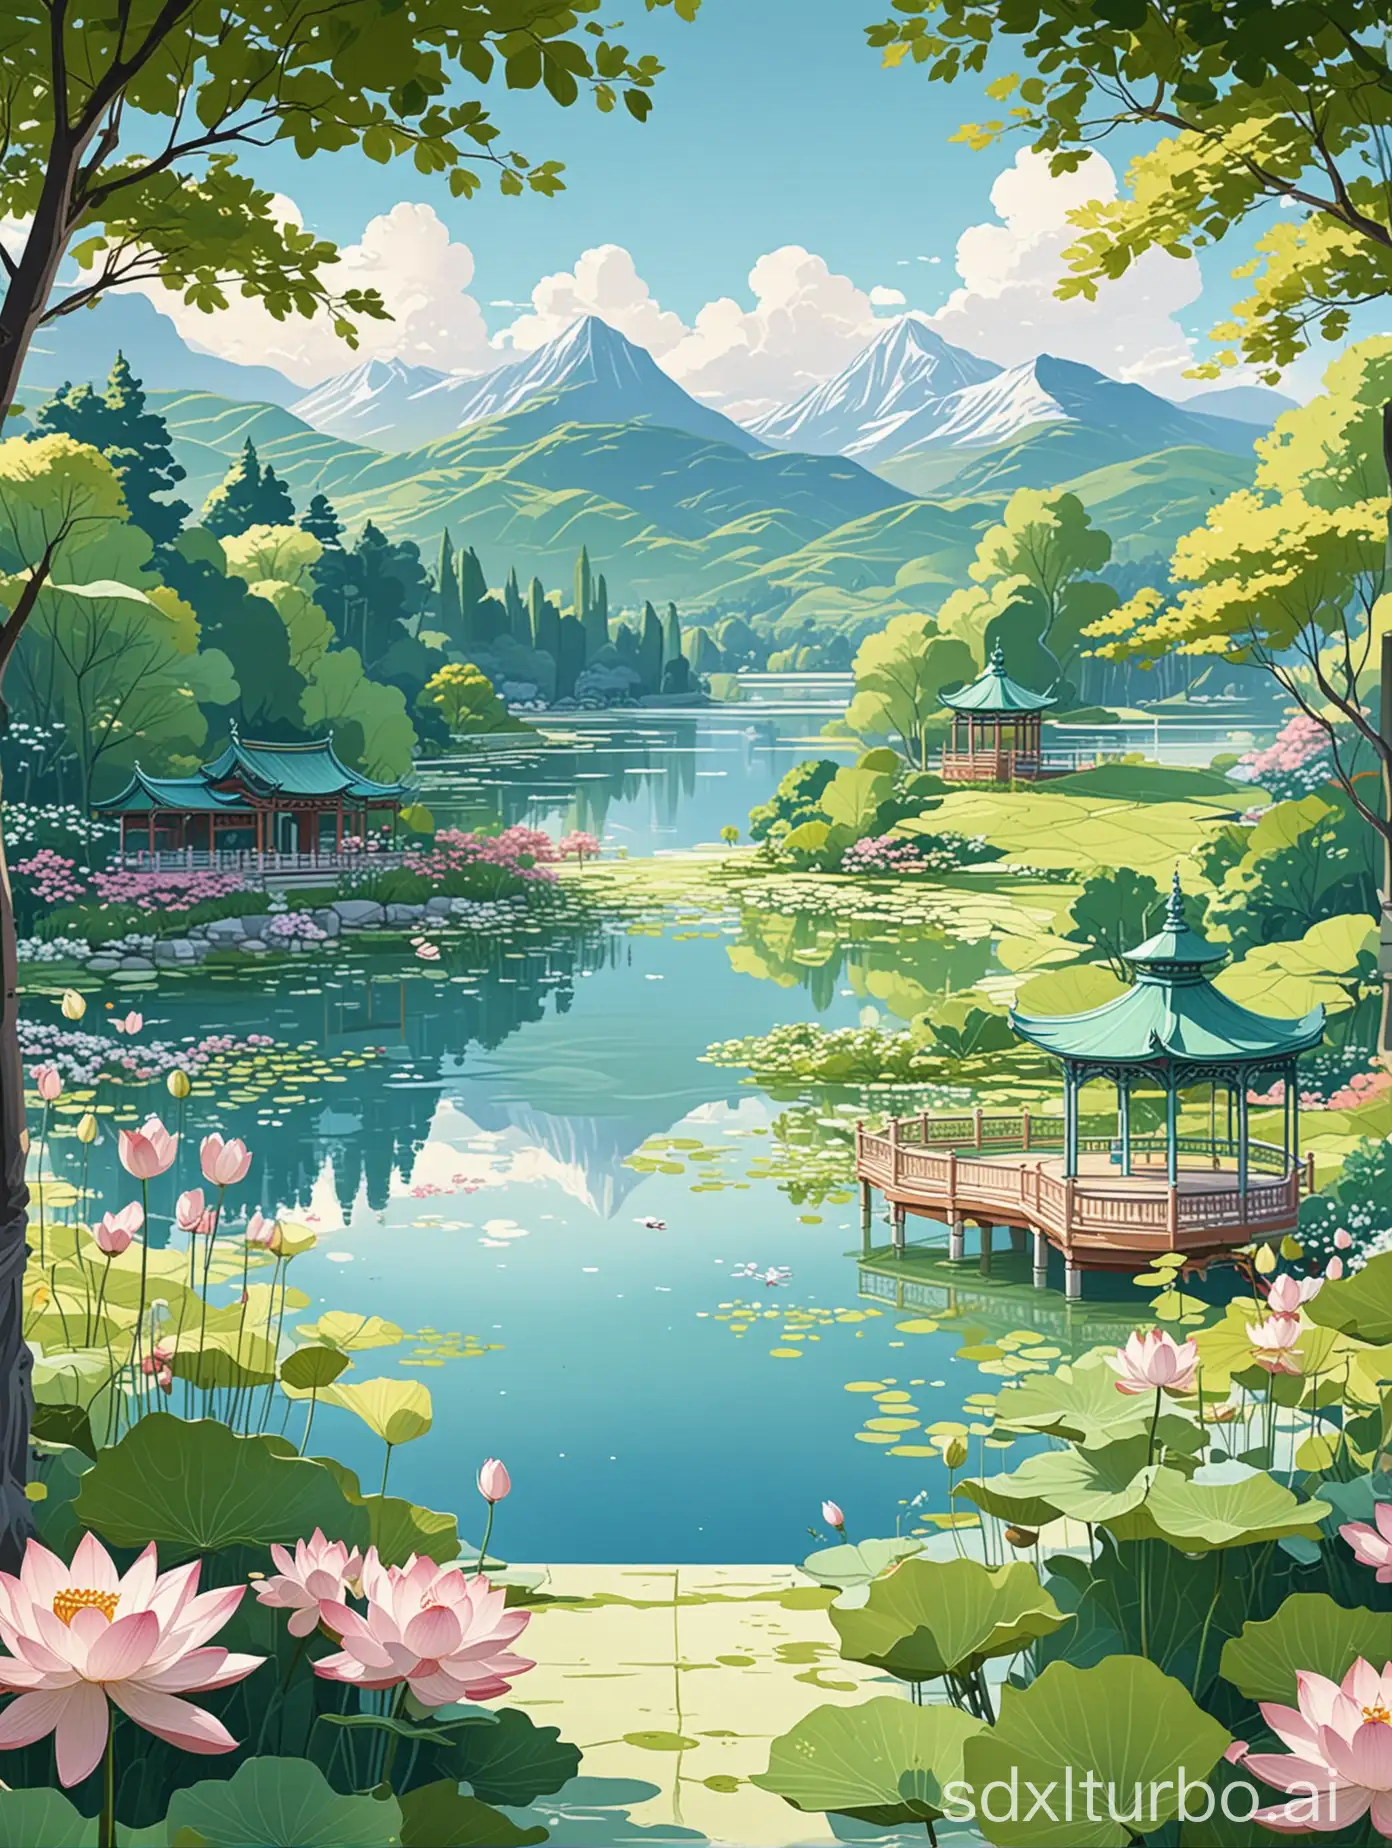 Childrens-Book-Illustration-Lakeside-Pavilion-with-Lotus-Leaves-and-Cartoon-Characters